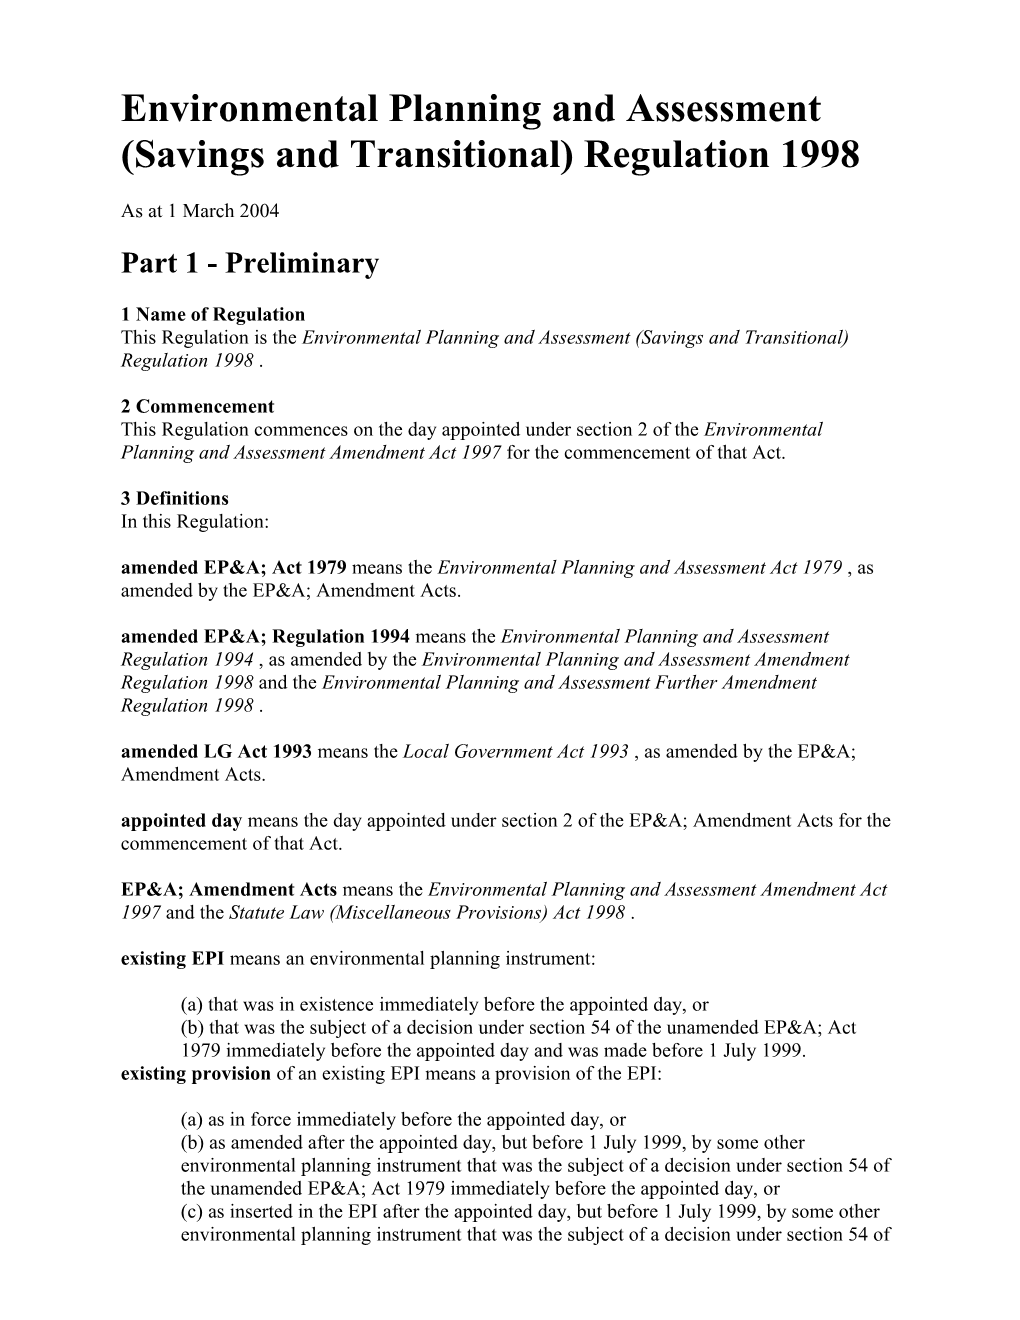 Environmental Planning and Assessment (Savings and Transitional) Regulation 1998